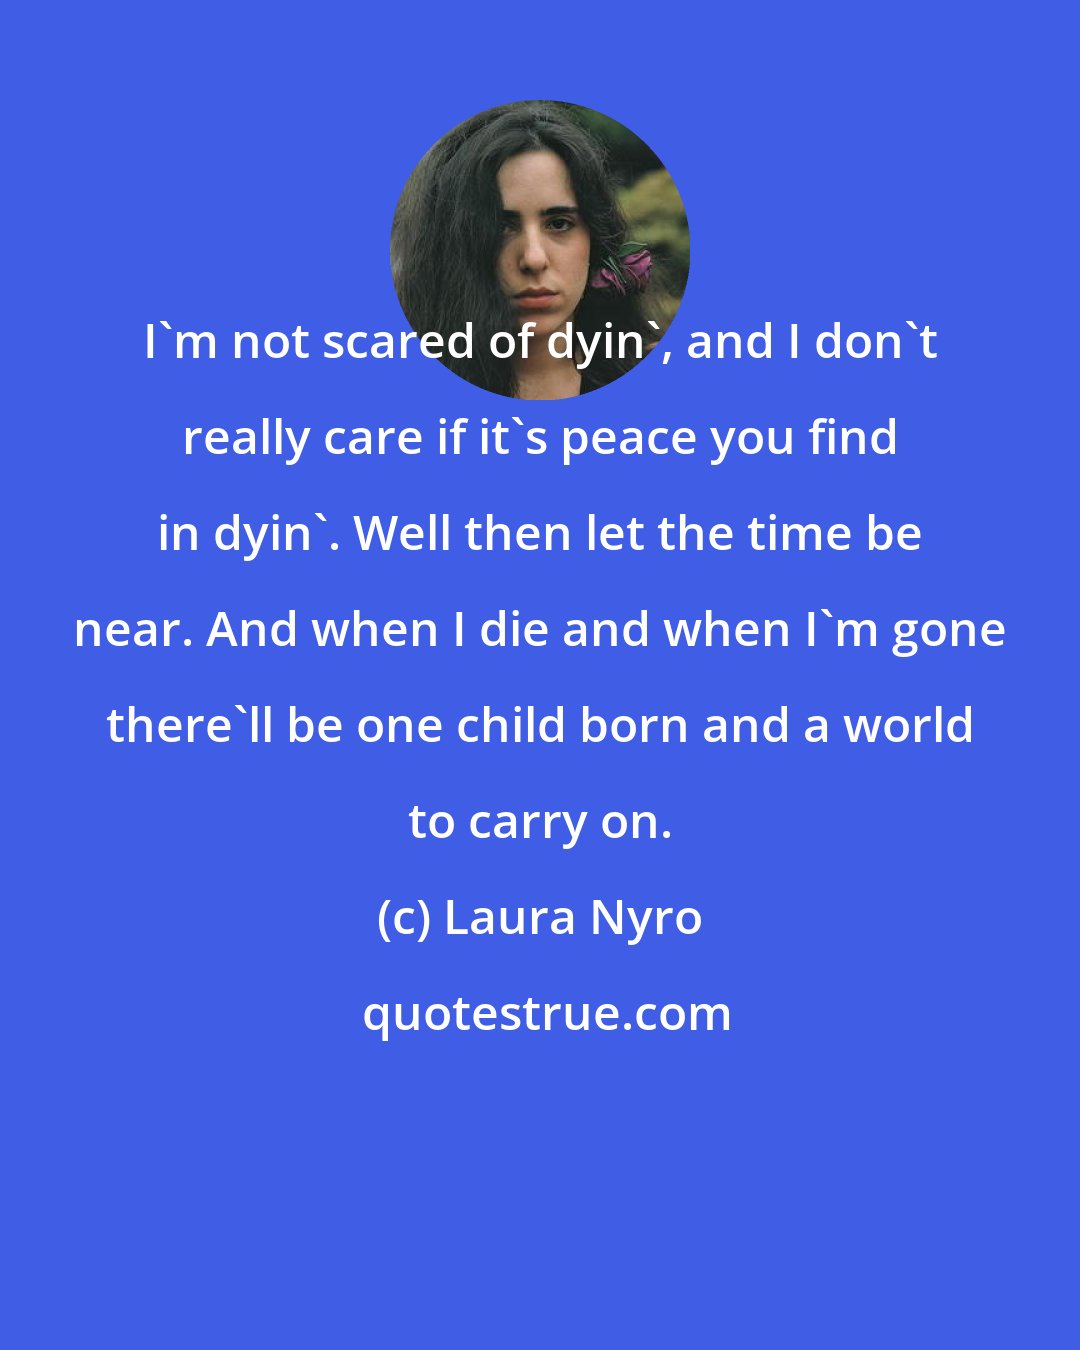 Laura Nyro: I'm not scared of dyin', and I don't really care if it's peace you find in dyin'. Well then let the time be near. And when I die and when I'm gone there'll be one child born and a world to carry on.